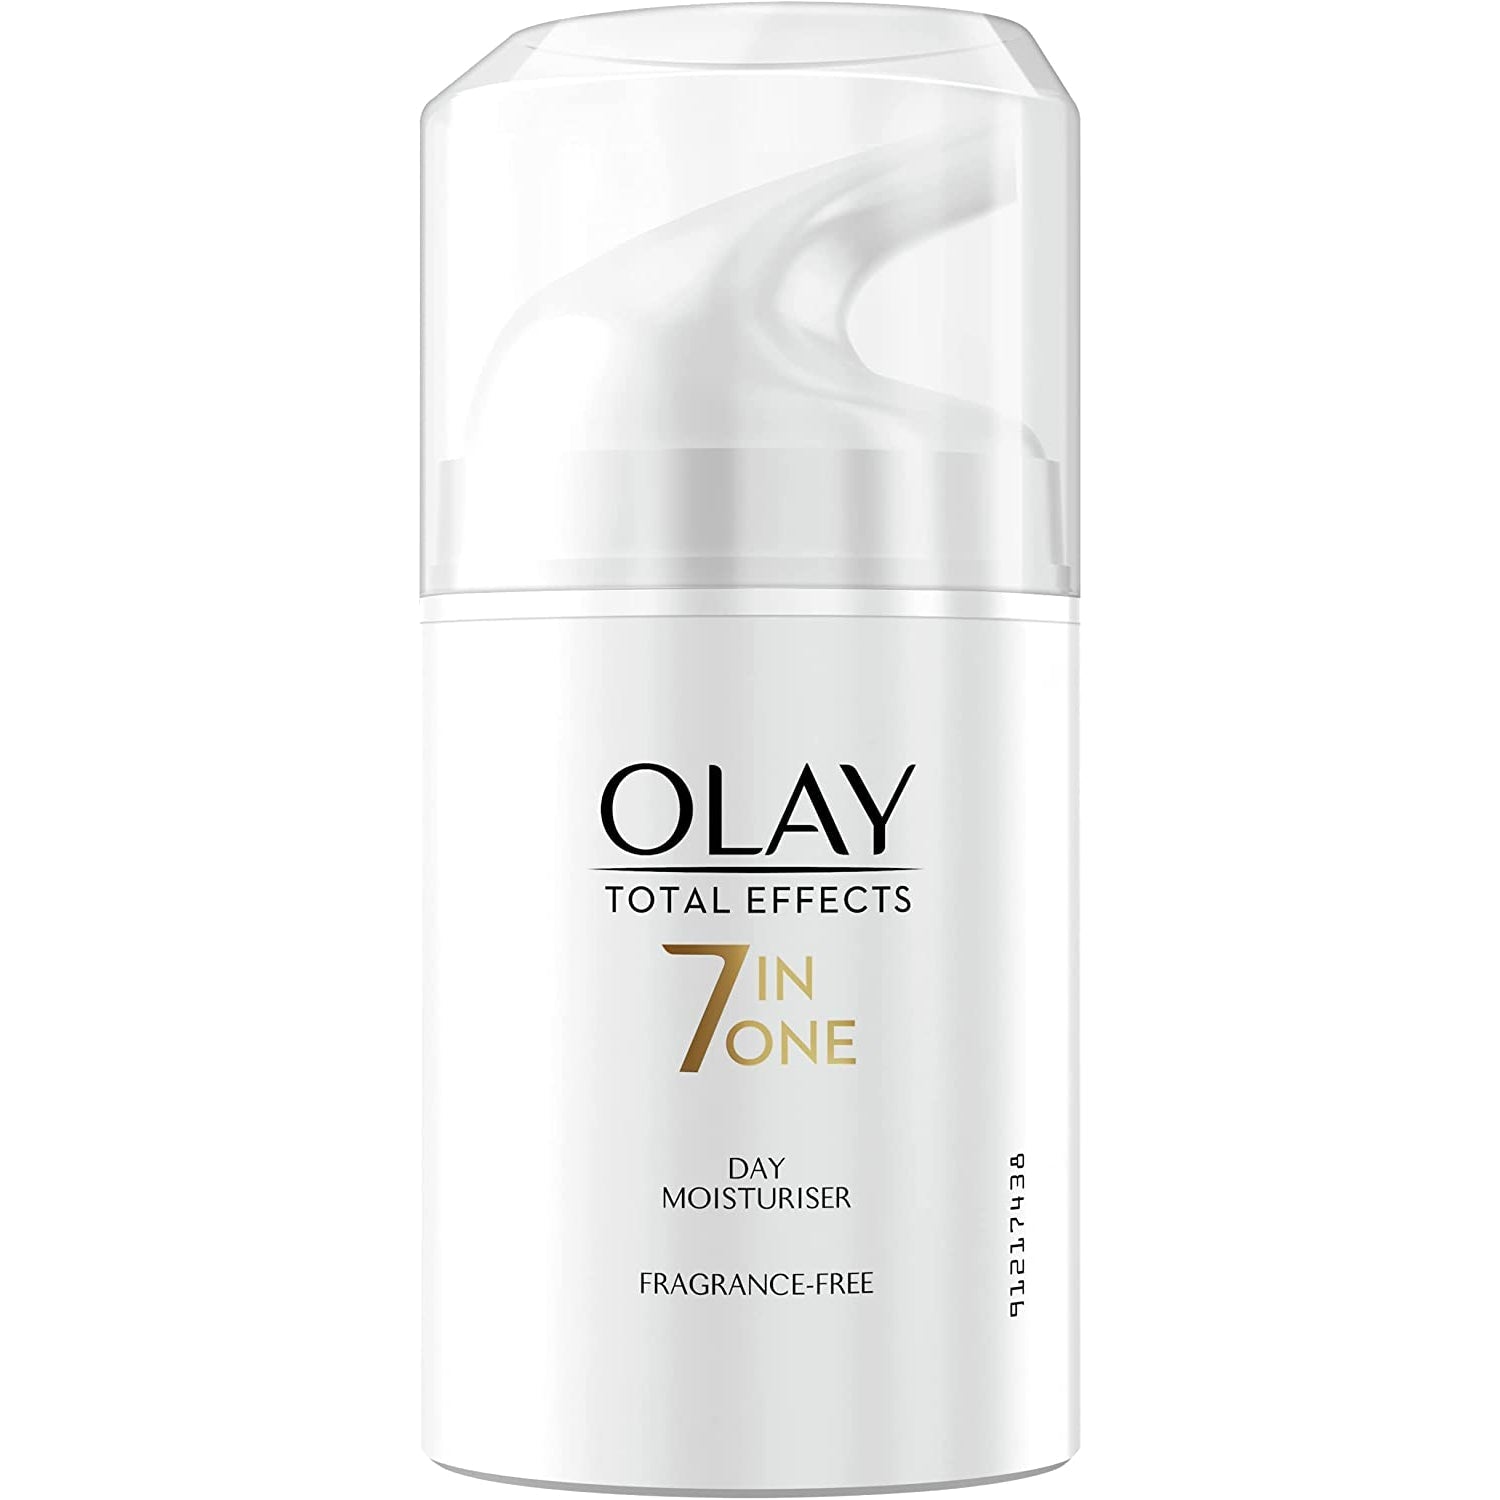 Olay Total Effects 7in1 Fragrance Free Moisturiser With Niacinamide, 50ml - Healthxpress.ie